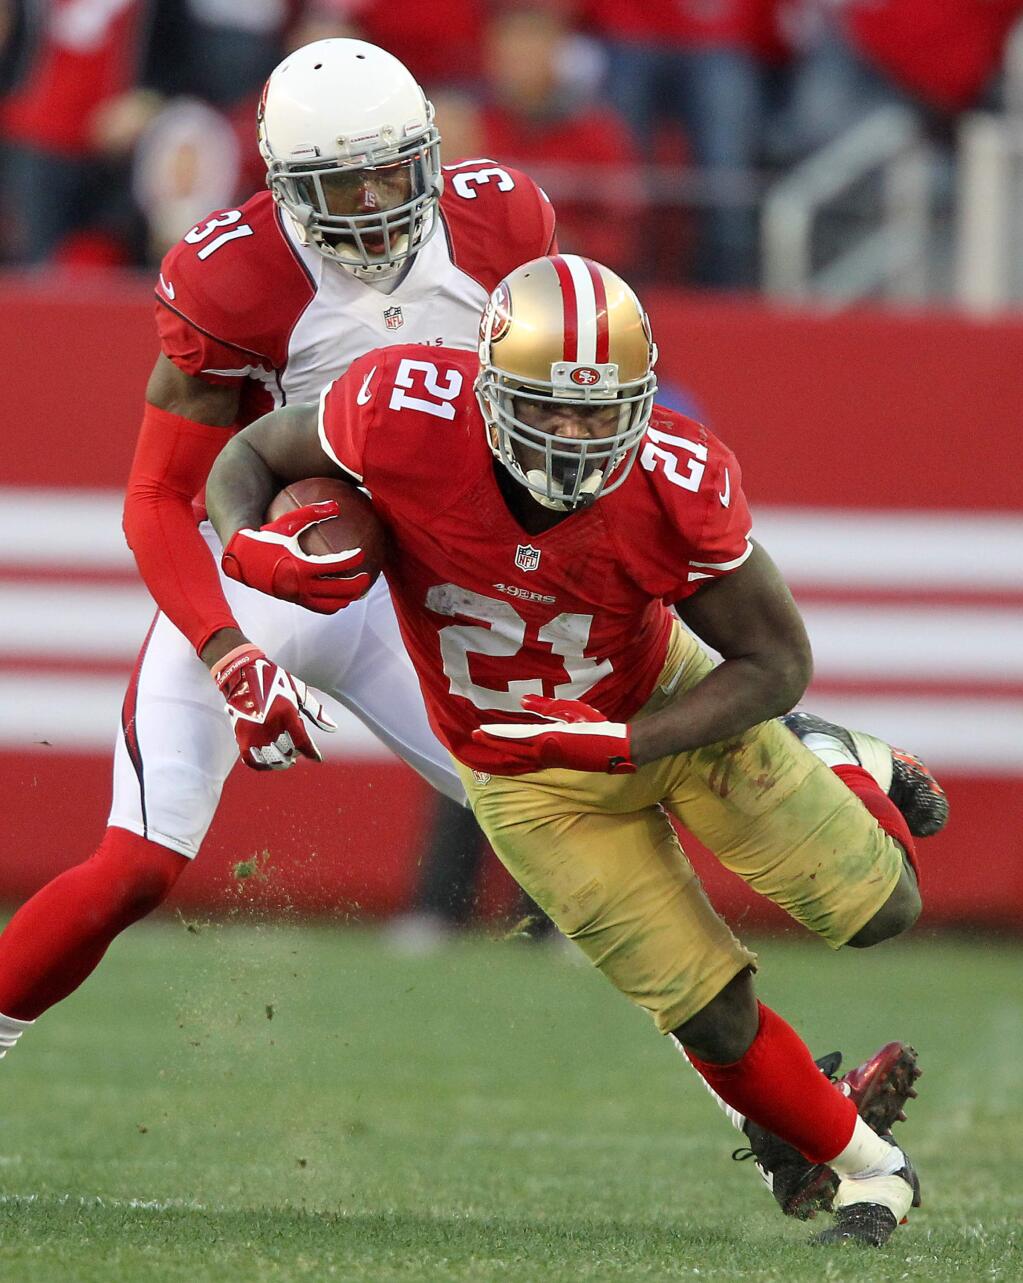 Frank Gore ran for 144 yards on Sunday including this 24 yard run in the 4th quarter. The San Francisco 49ers beat the Arizona Cardinals, 20-17, on December 28, 2014. (Photo by John Burgess/The Press Democrat)